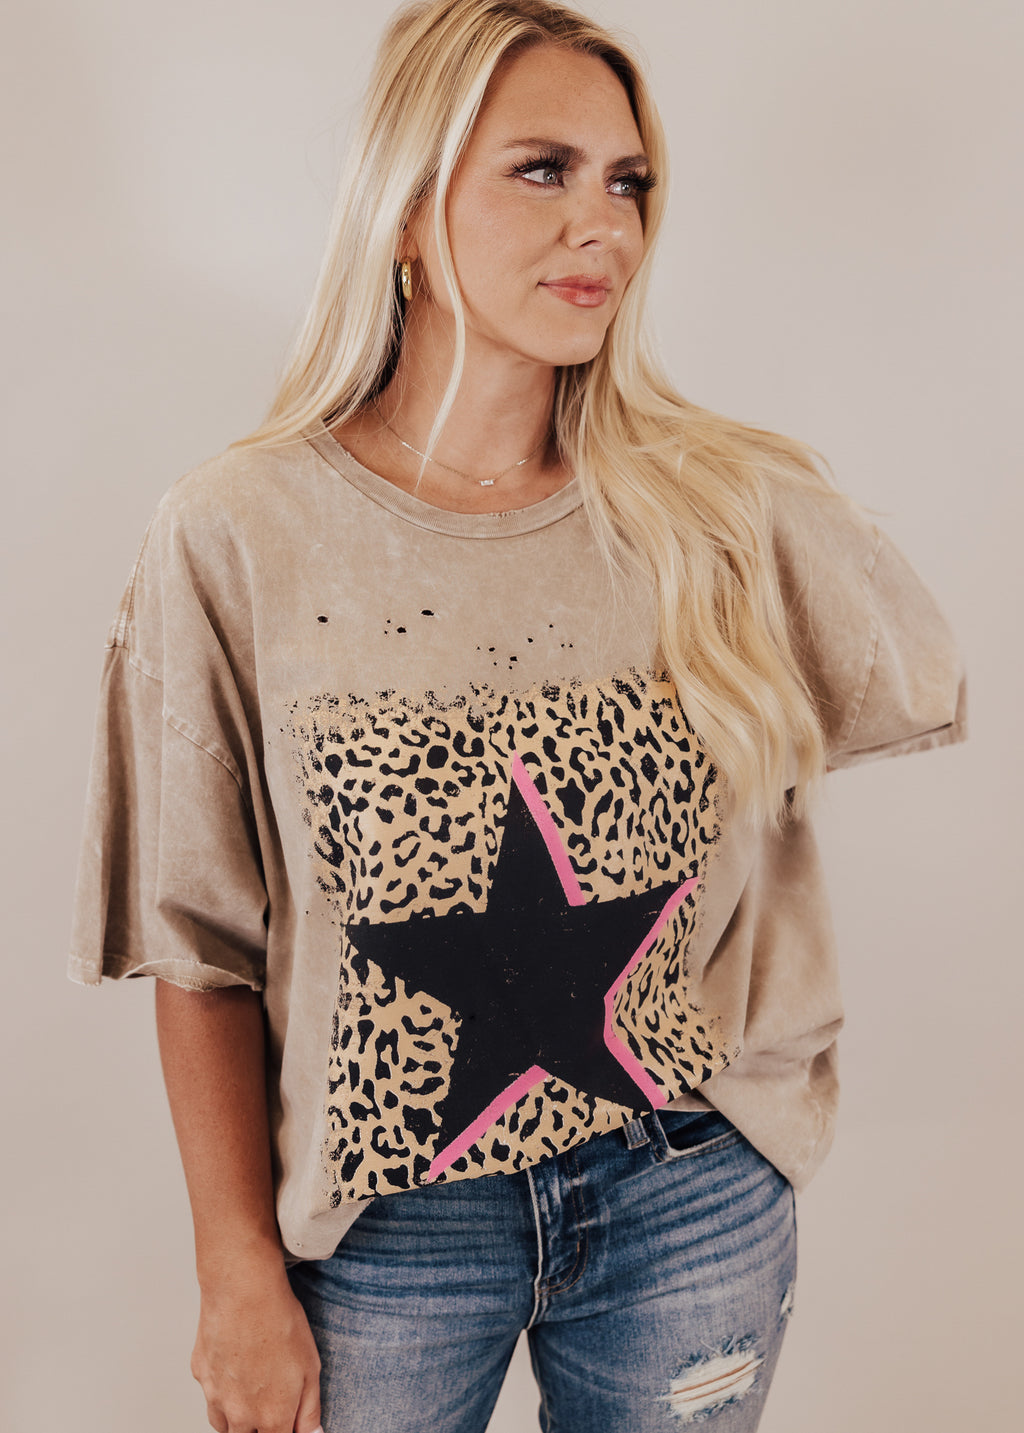 #77 Oversized Distressed Star Leopard Top (CAN FIT XL) *MINERAL MOCHA